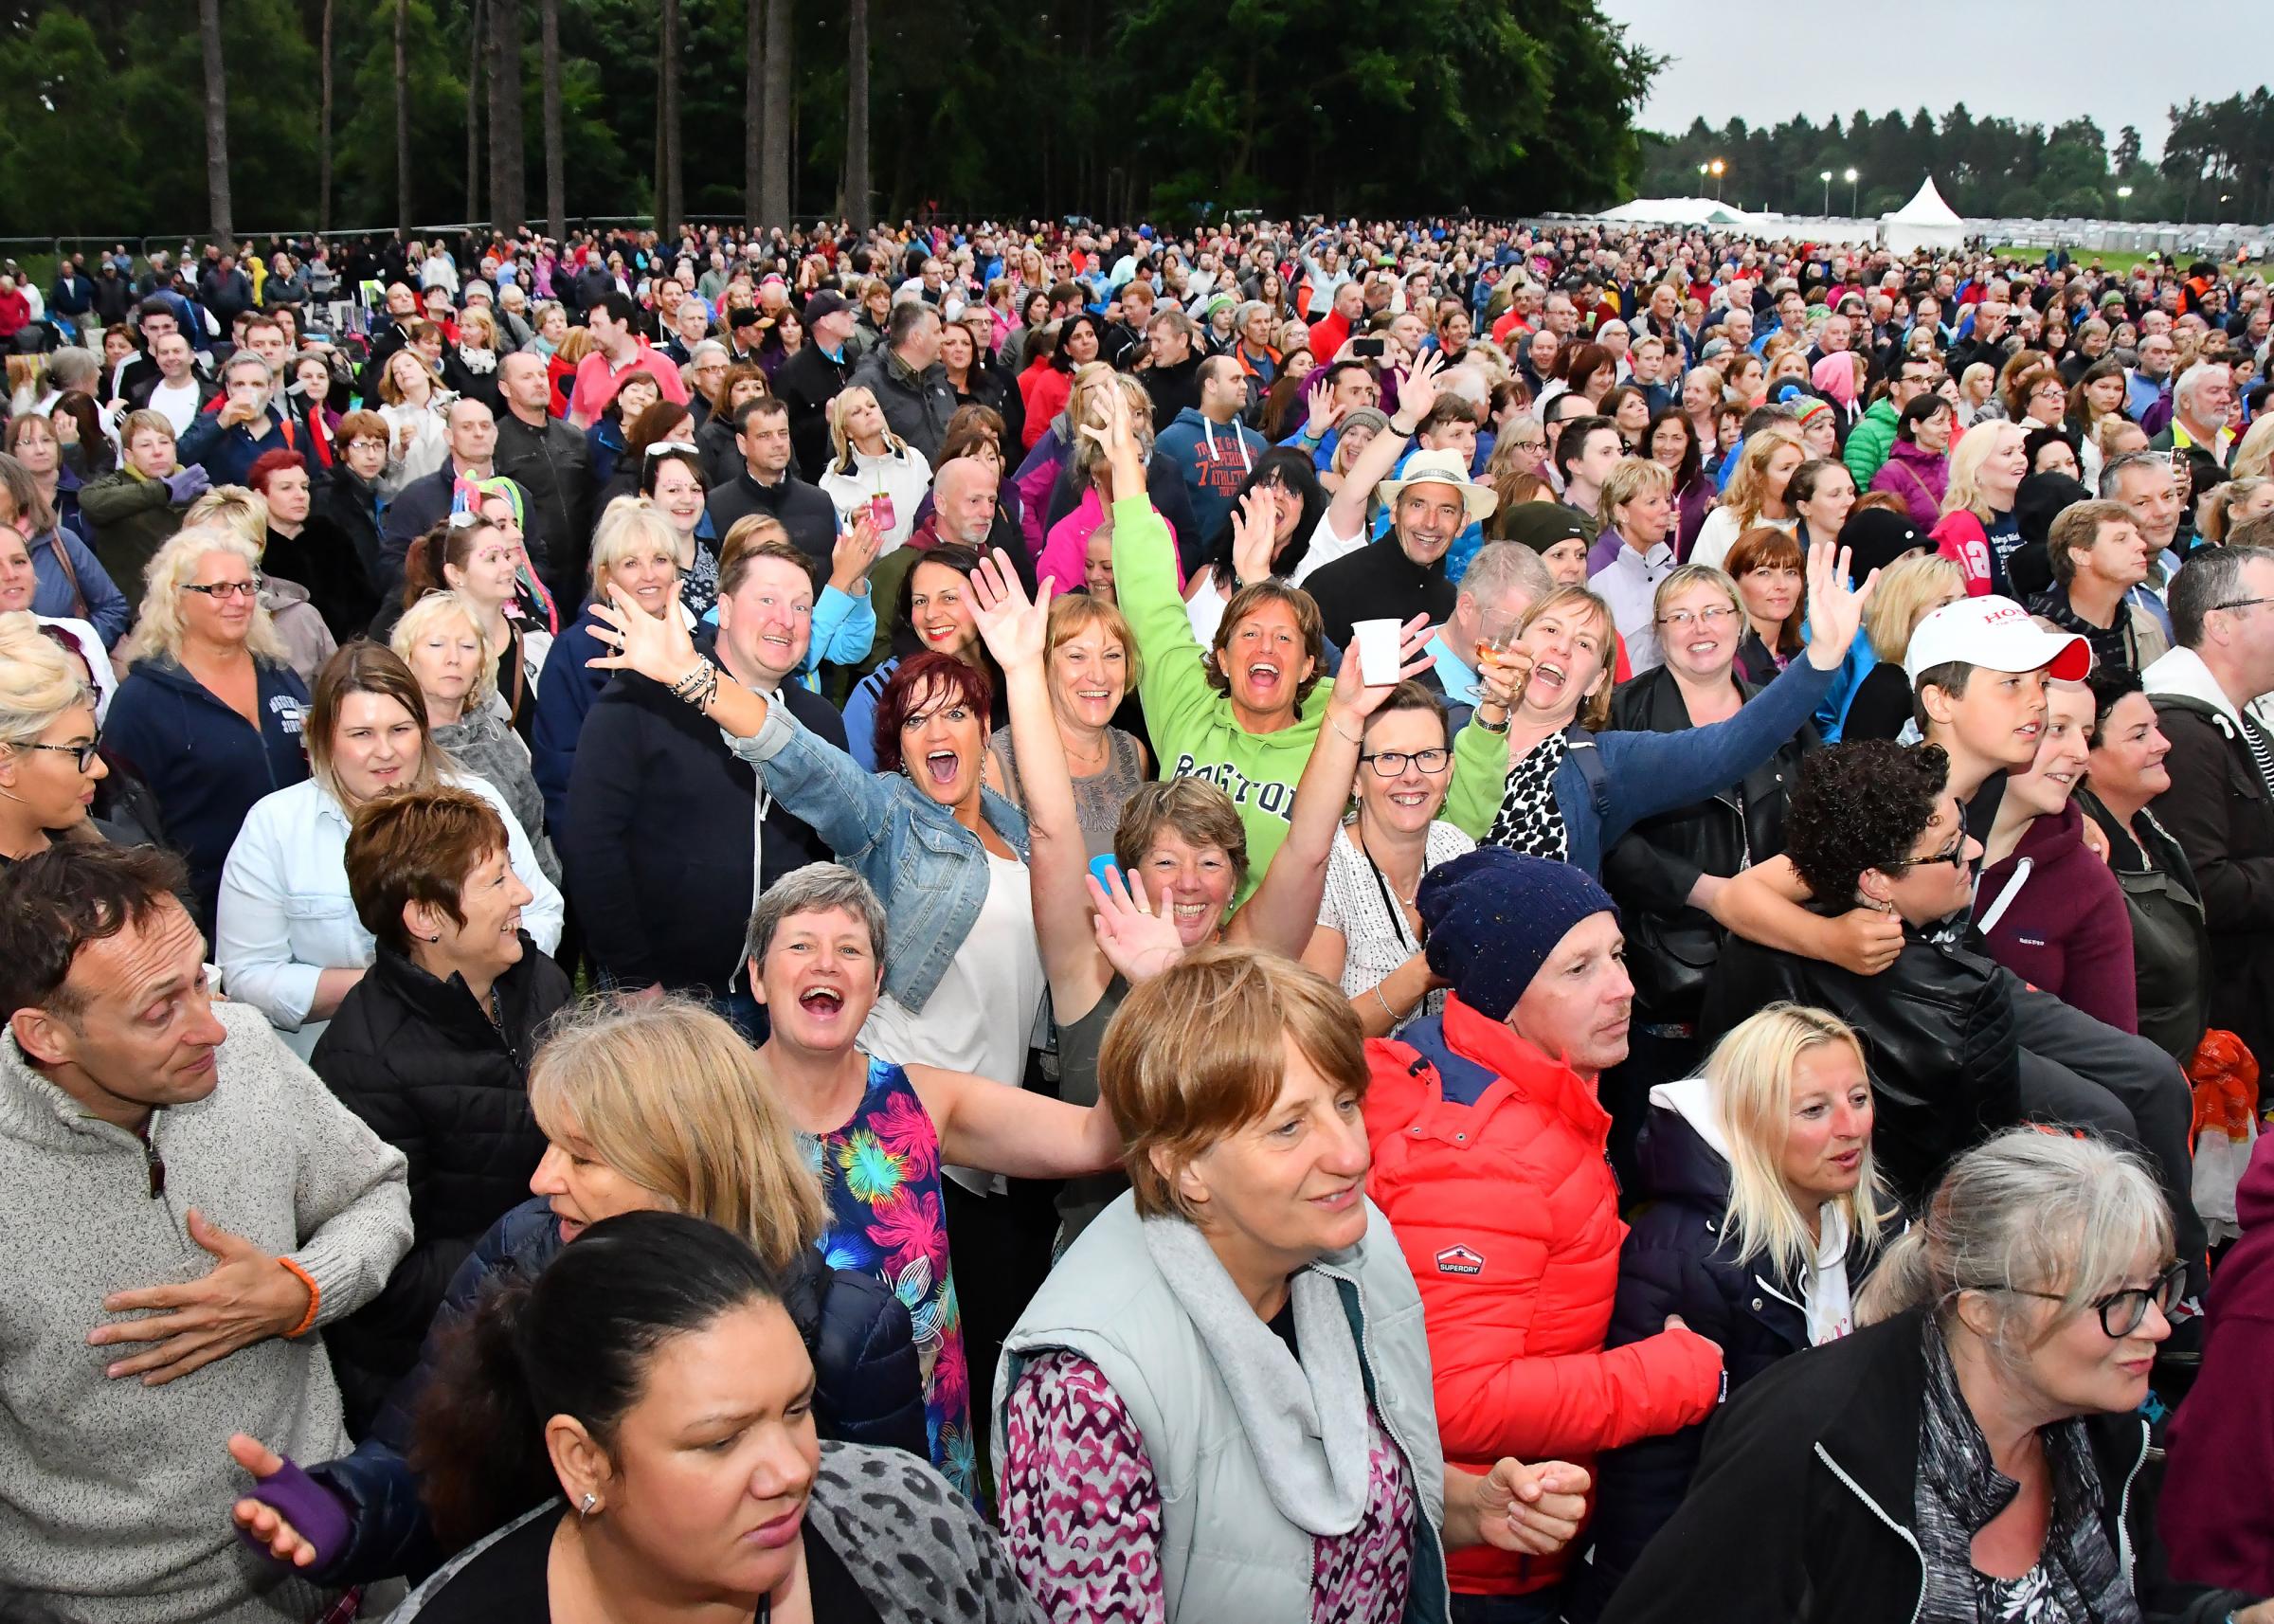 Review: Rick Astley at Dalby Forest